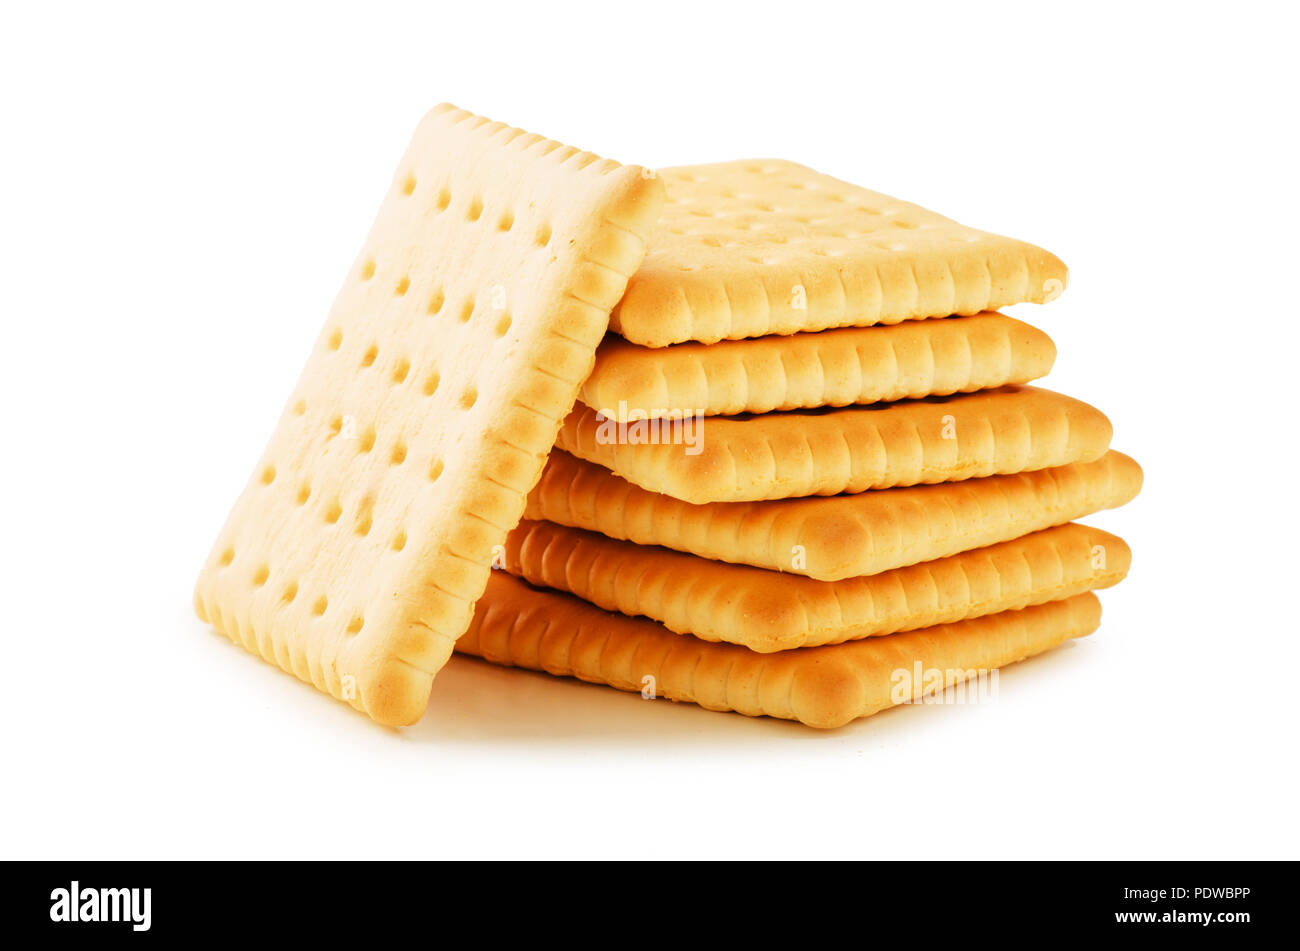 Handful of biscuits isolated on a white background Stock Photo